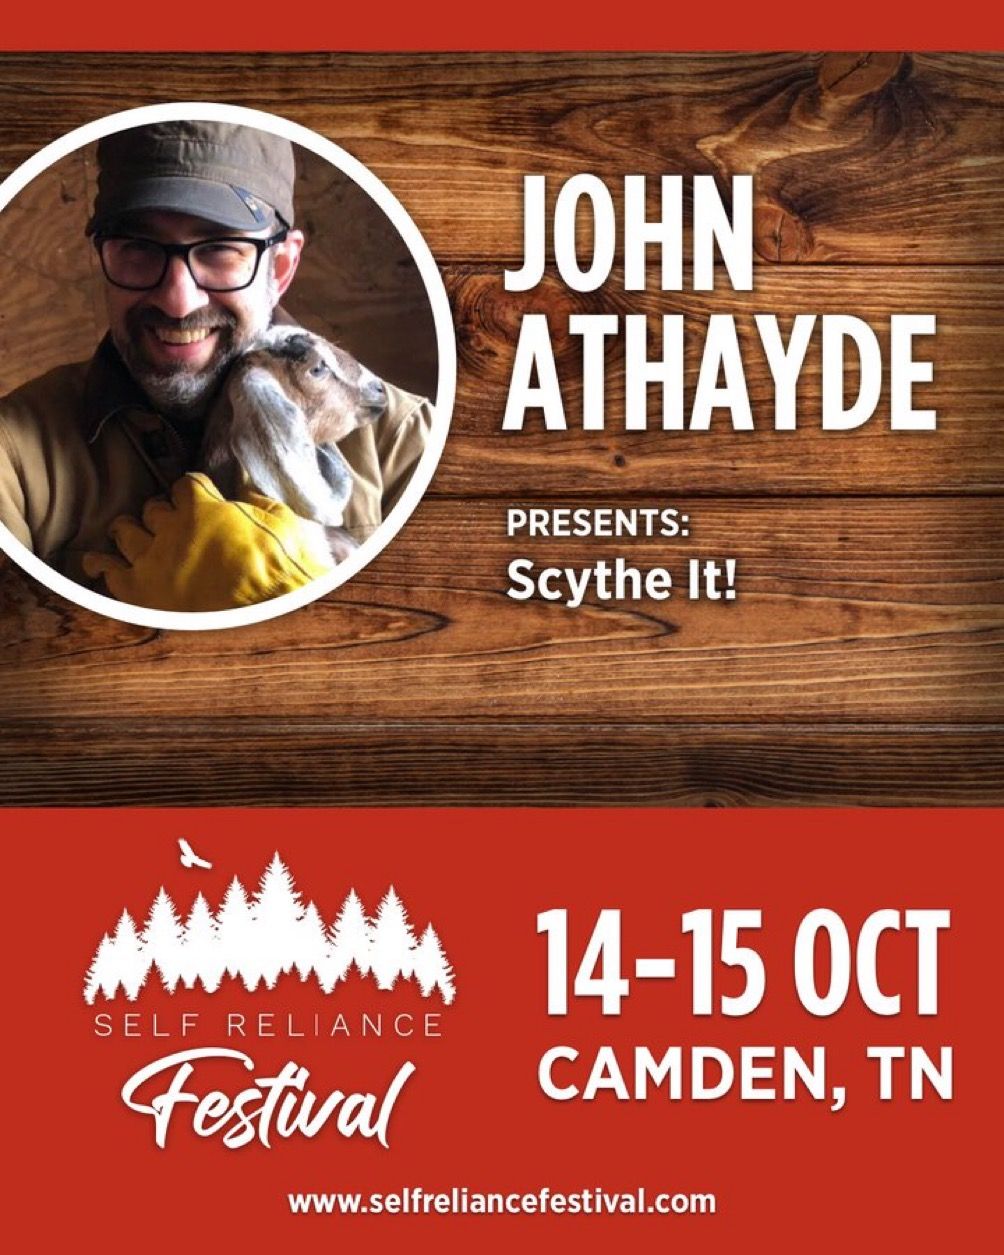 John to Present on Scything at Self Reliance Festival